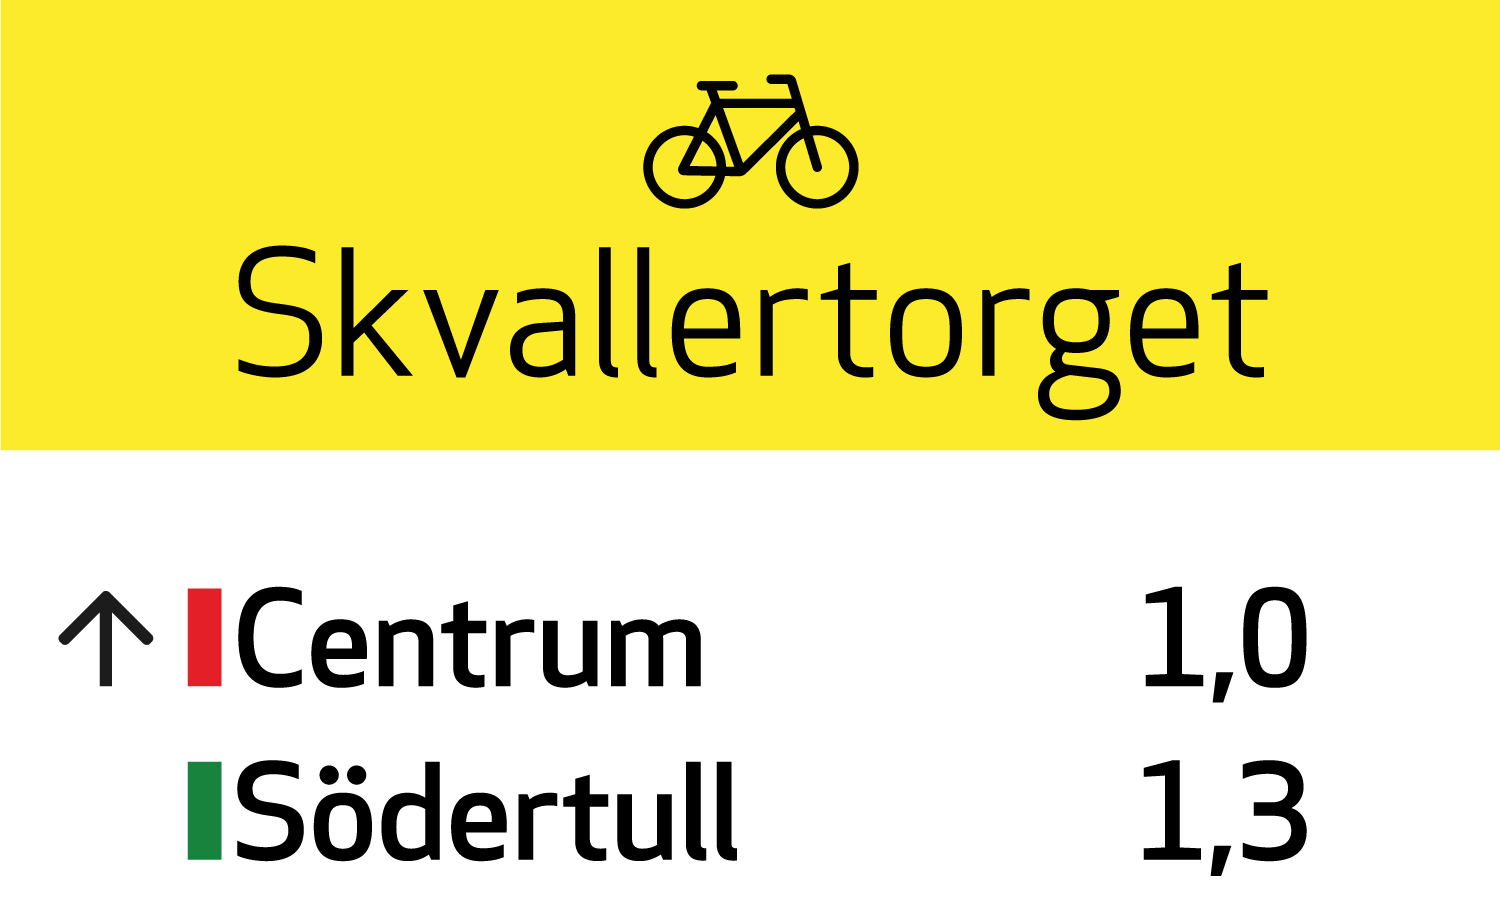 Bike signage for City of Norrköping by Viktor Lanneld and Vicky Trouerbach